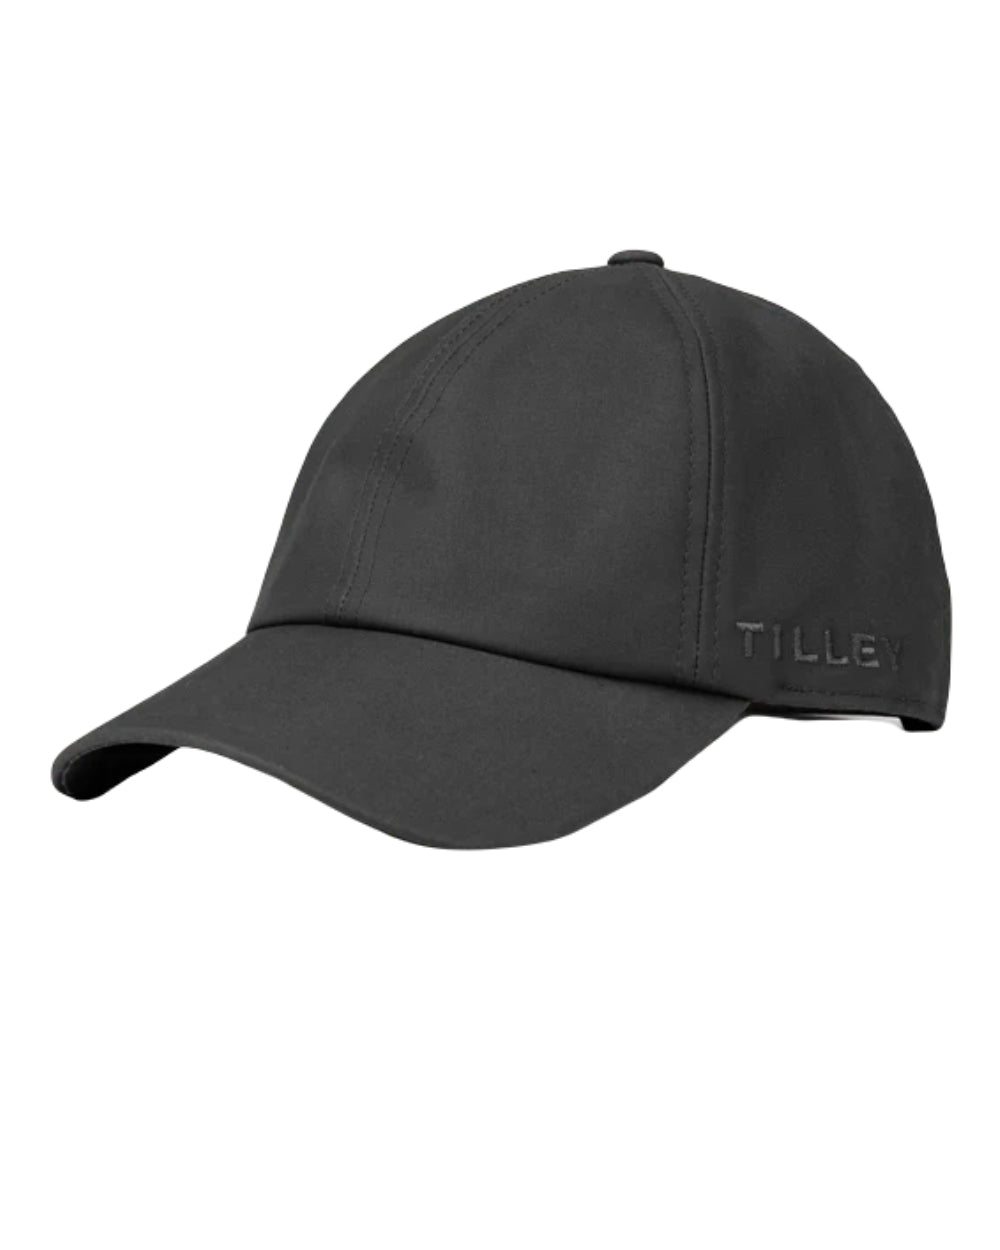 Black Coloured Tilley Hats Waxed Baseball Cap On A White Background 